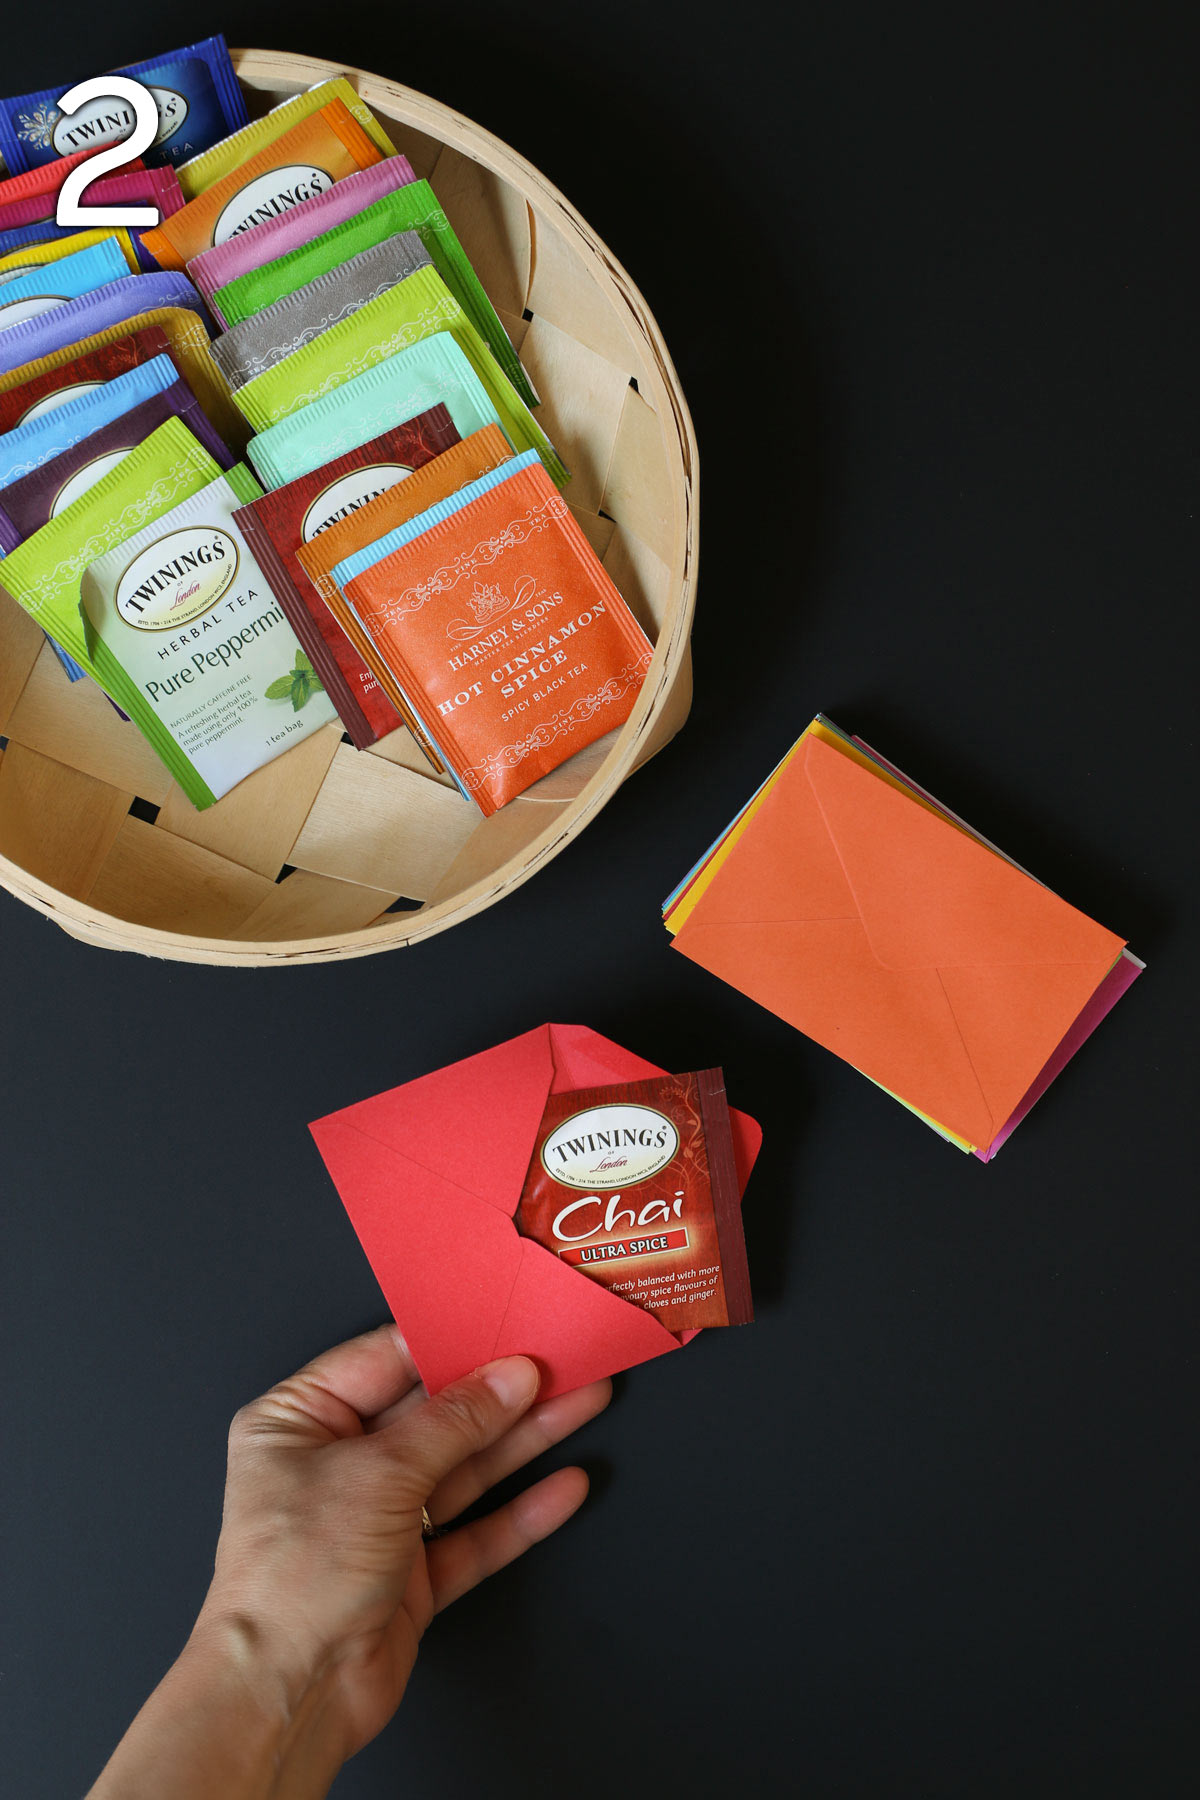 placing a red tea bag into a red envelope with a stack of envelopes and the tea basket nearby.